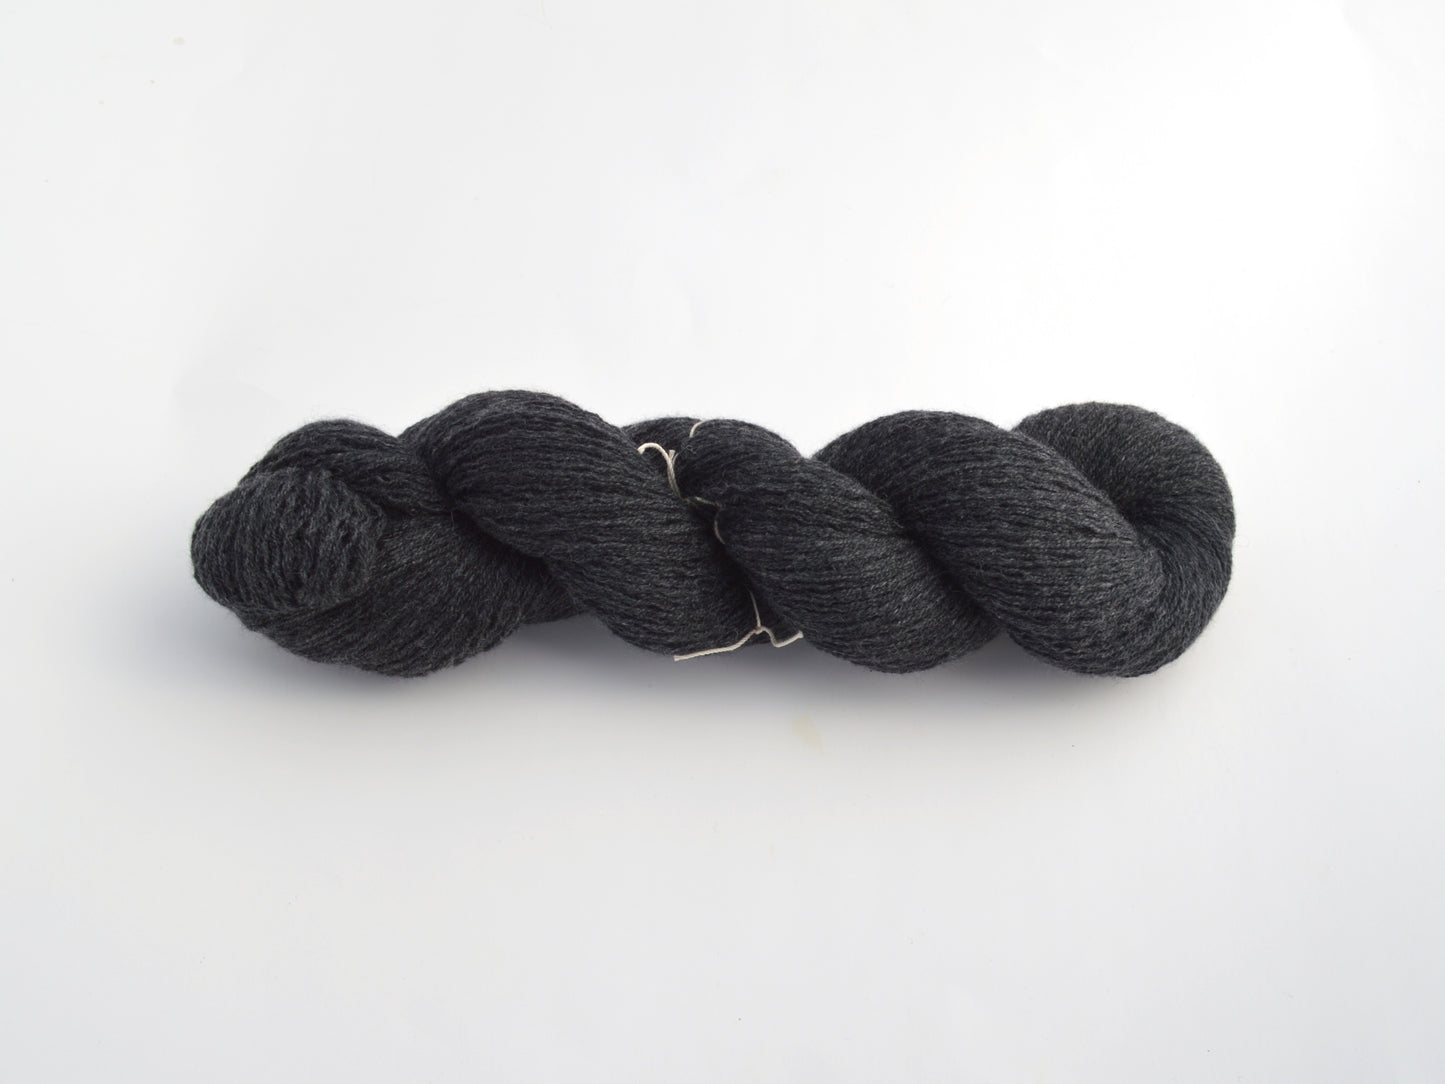 Heavy Lace Weight Recycled Cashmere Yarn in Almost Black